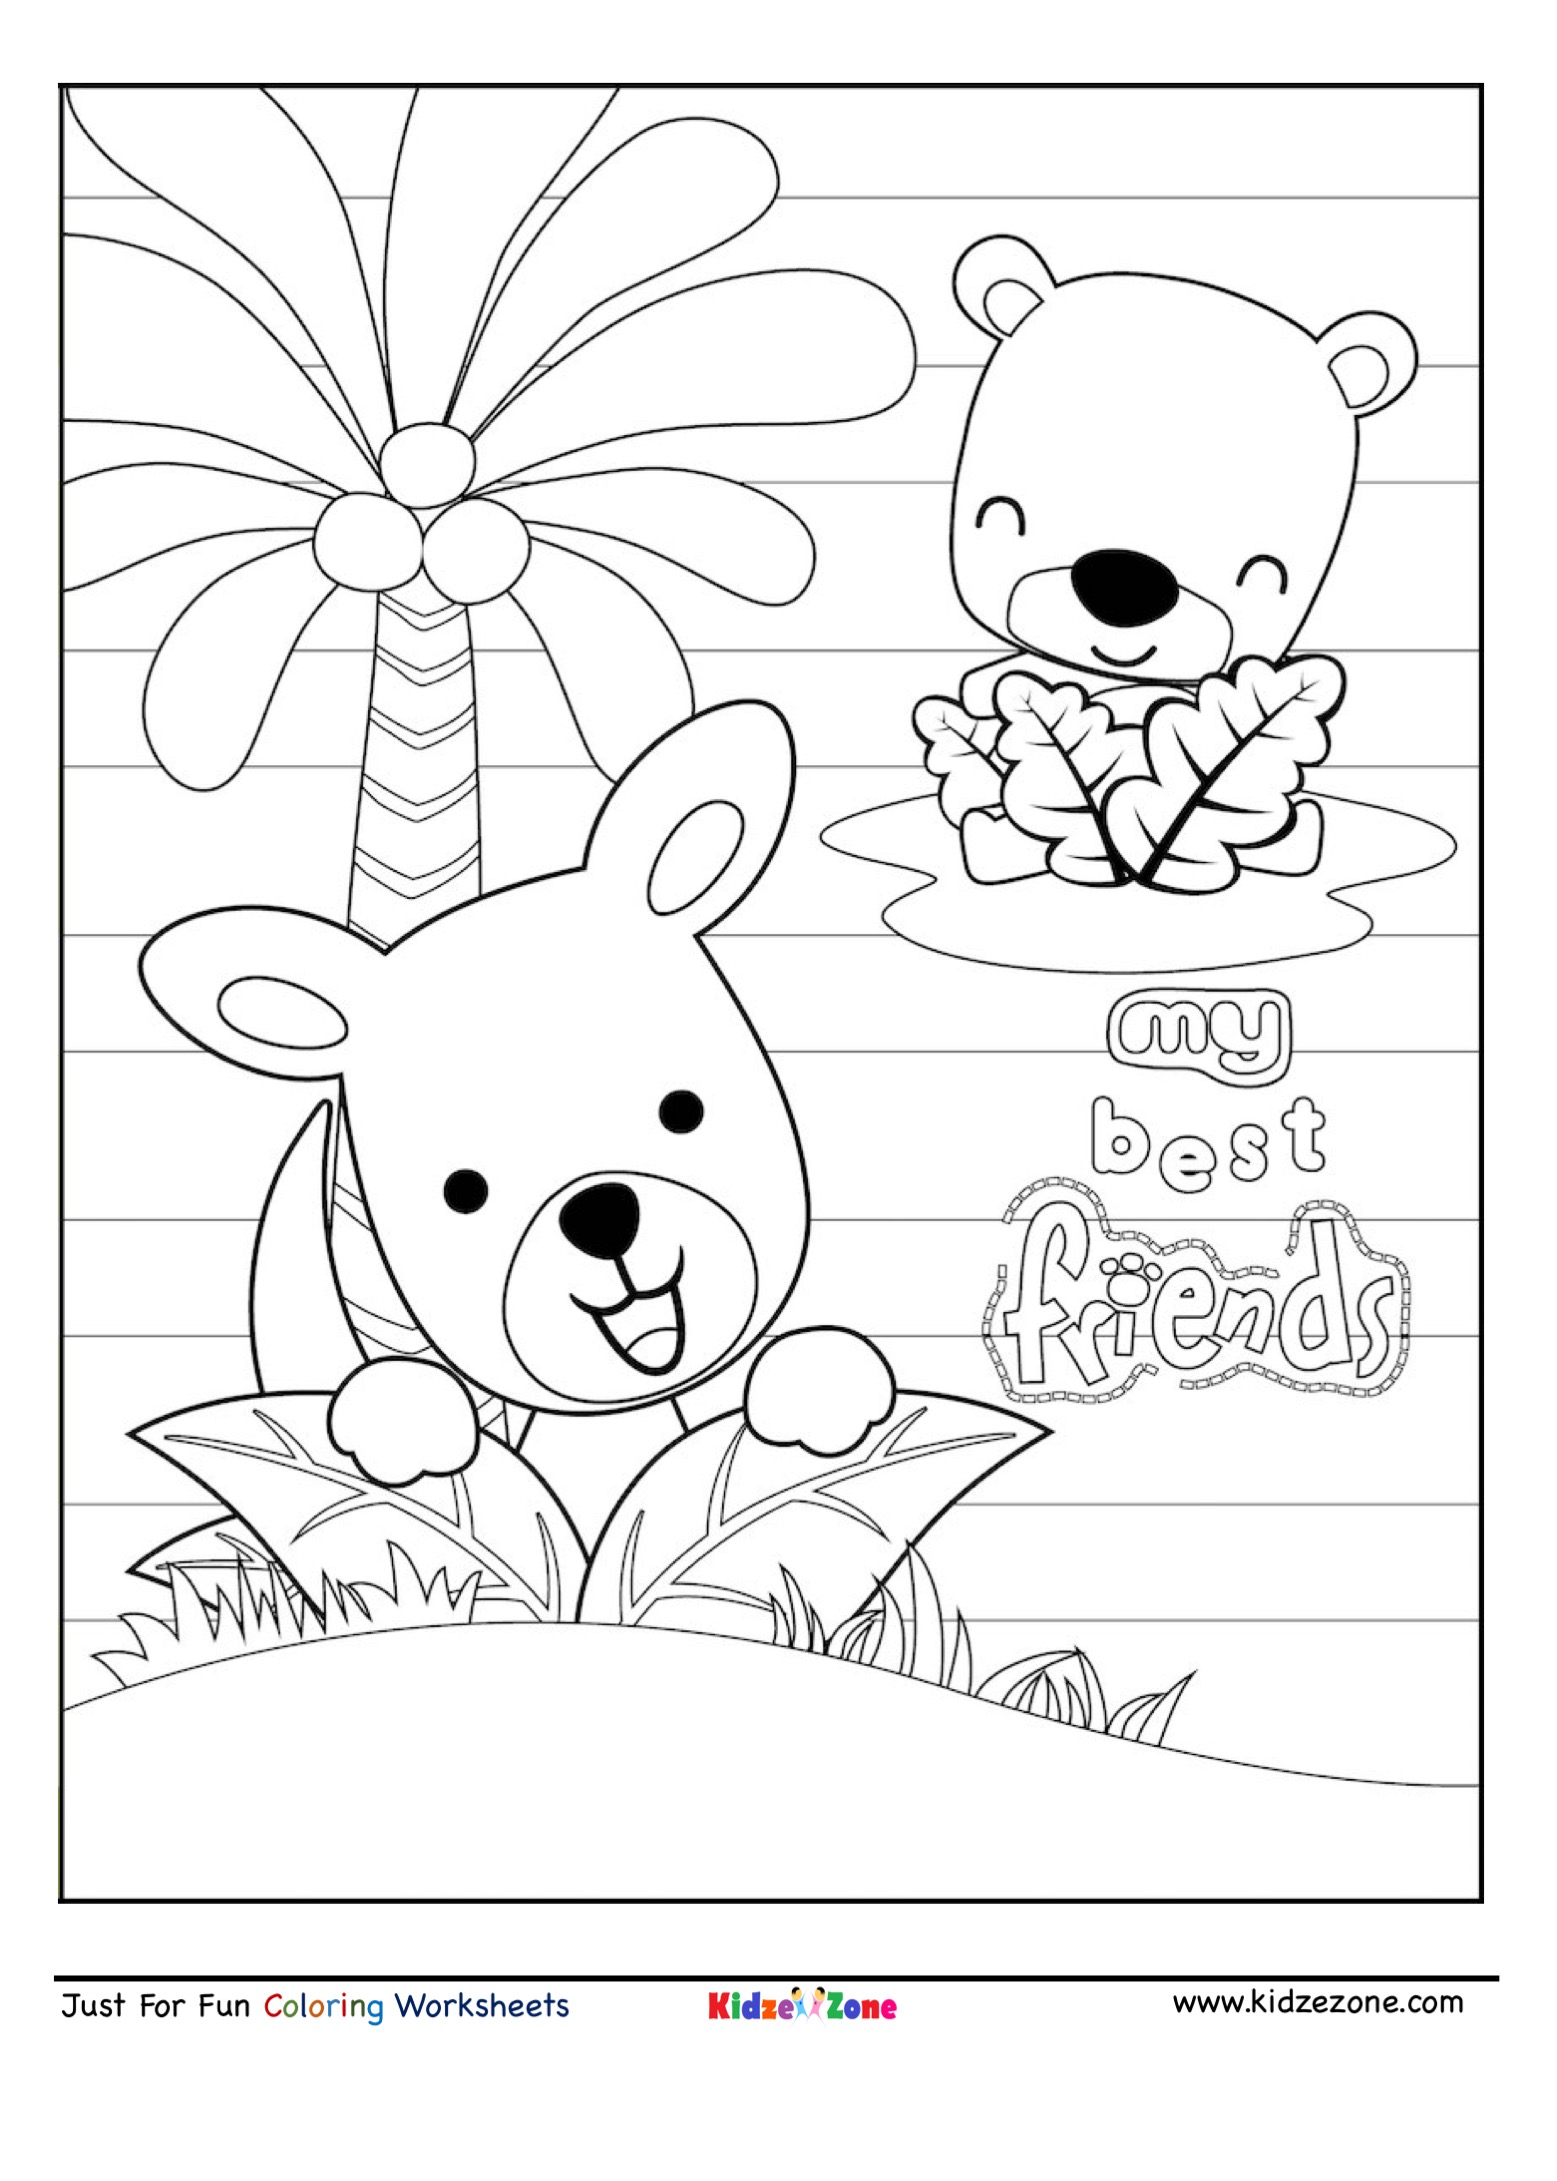 Best bear friends coloring page